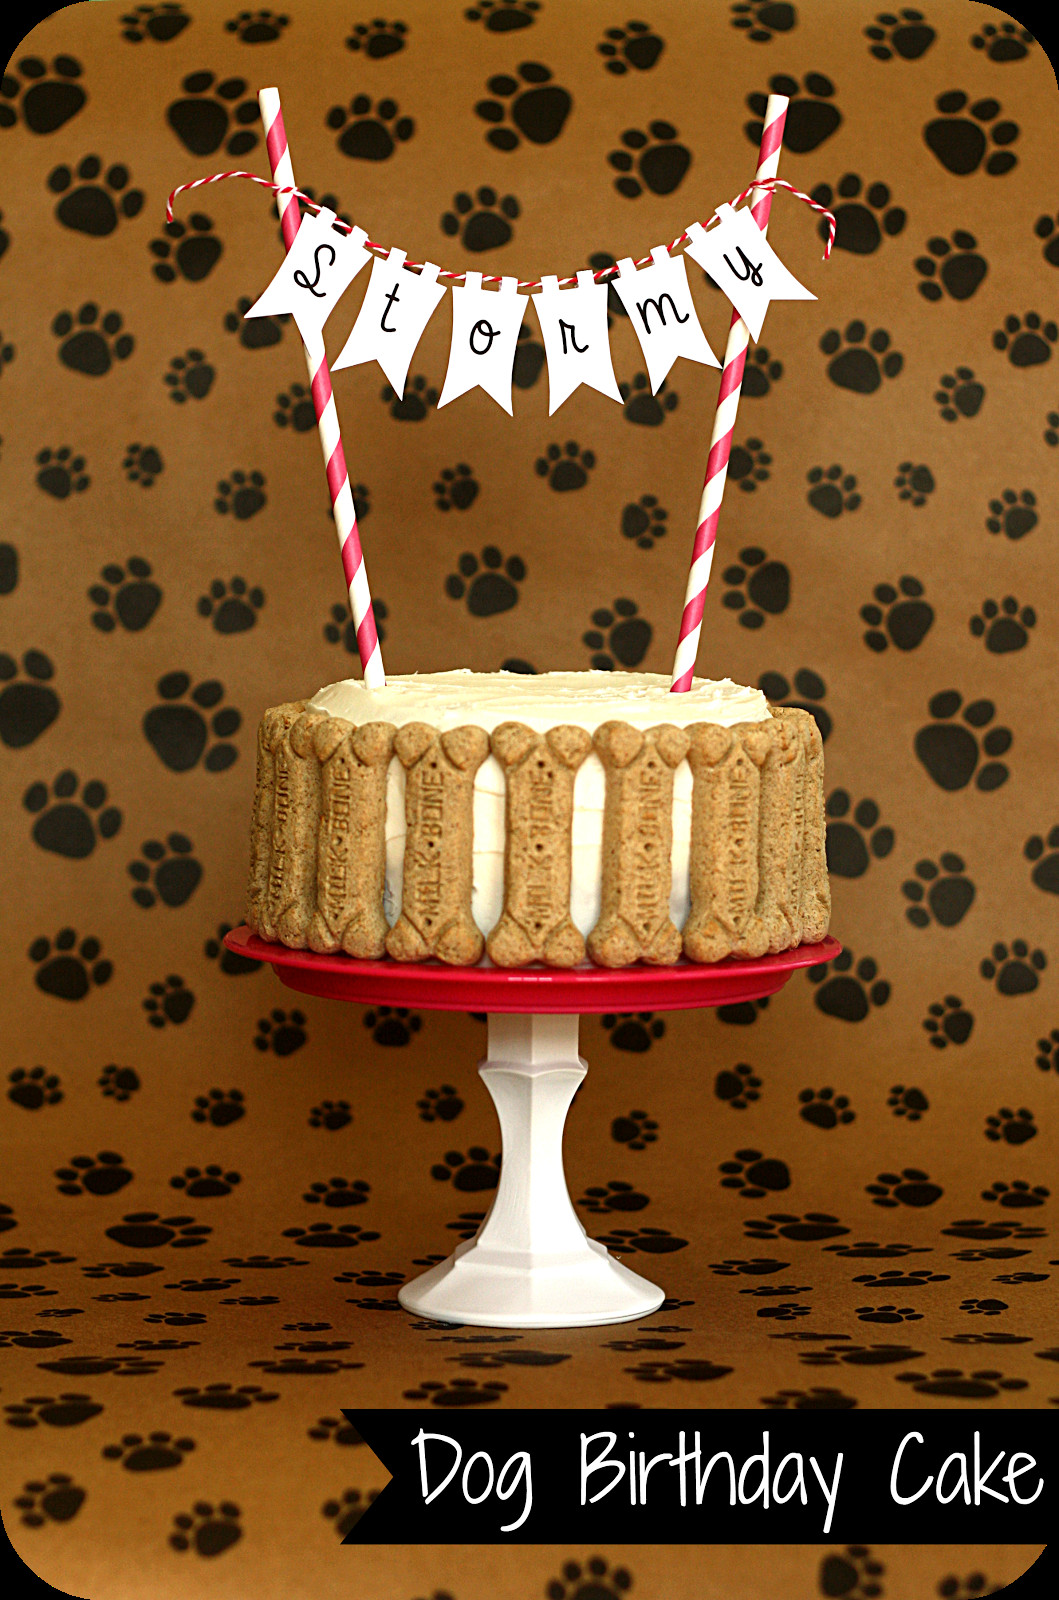 Homemade Dog Birthday Cake
 Keeping My Cents ¢¢¢ March 2013